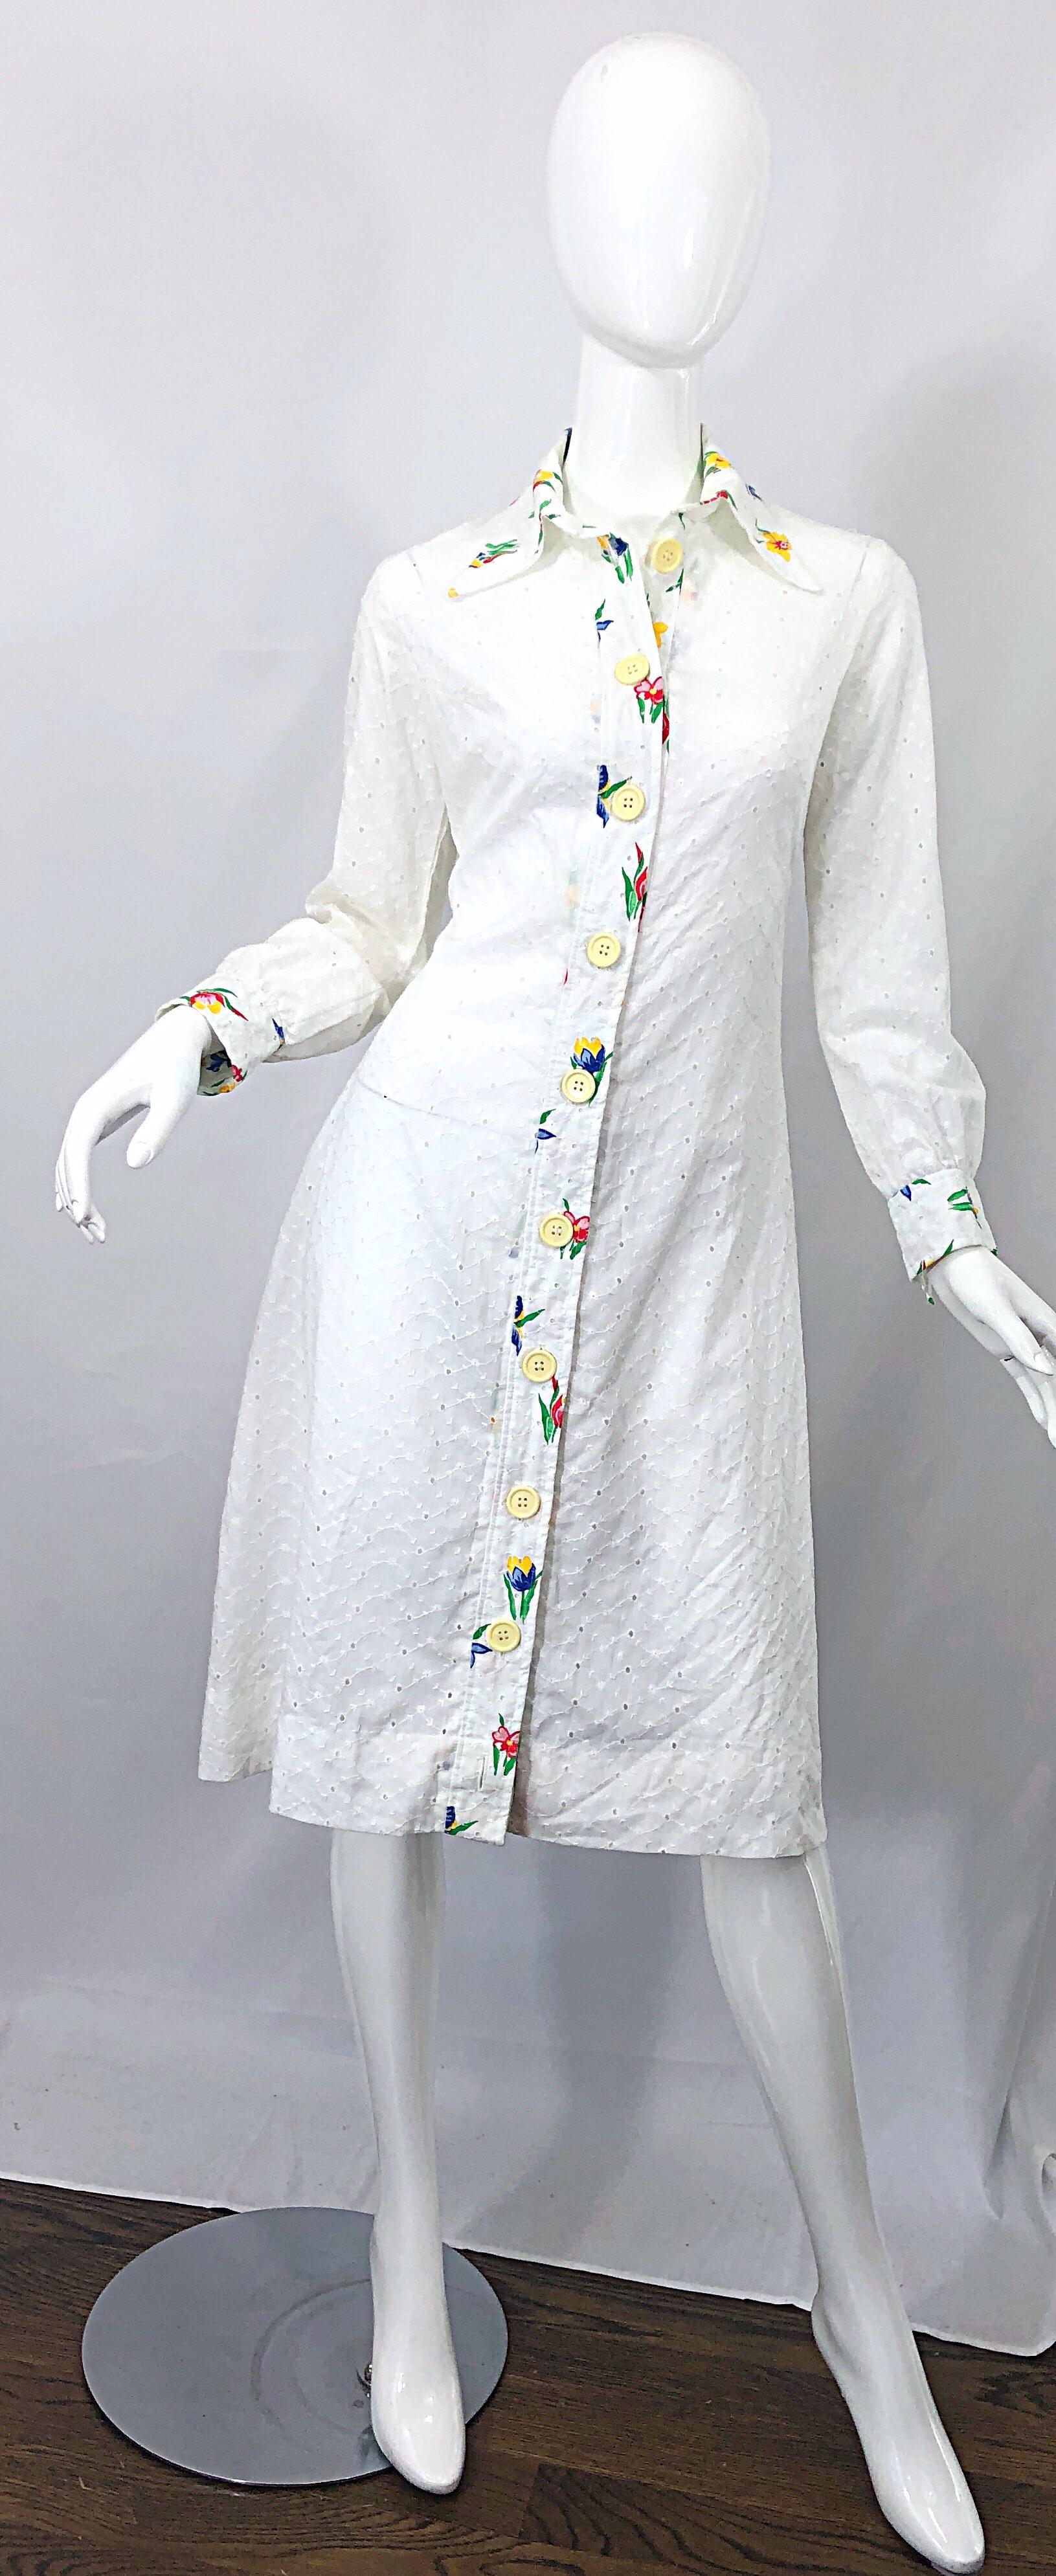 Chic 1970s JOSEPH MAGNIN white cotton eyelet embrodiered long sleeve shirt dress! Features a stark white color with embroidered flowers down the front center, collar, and sleeve cuffs. Vibrant colors of red, blue, yellow, green and orange. Buttons